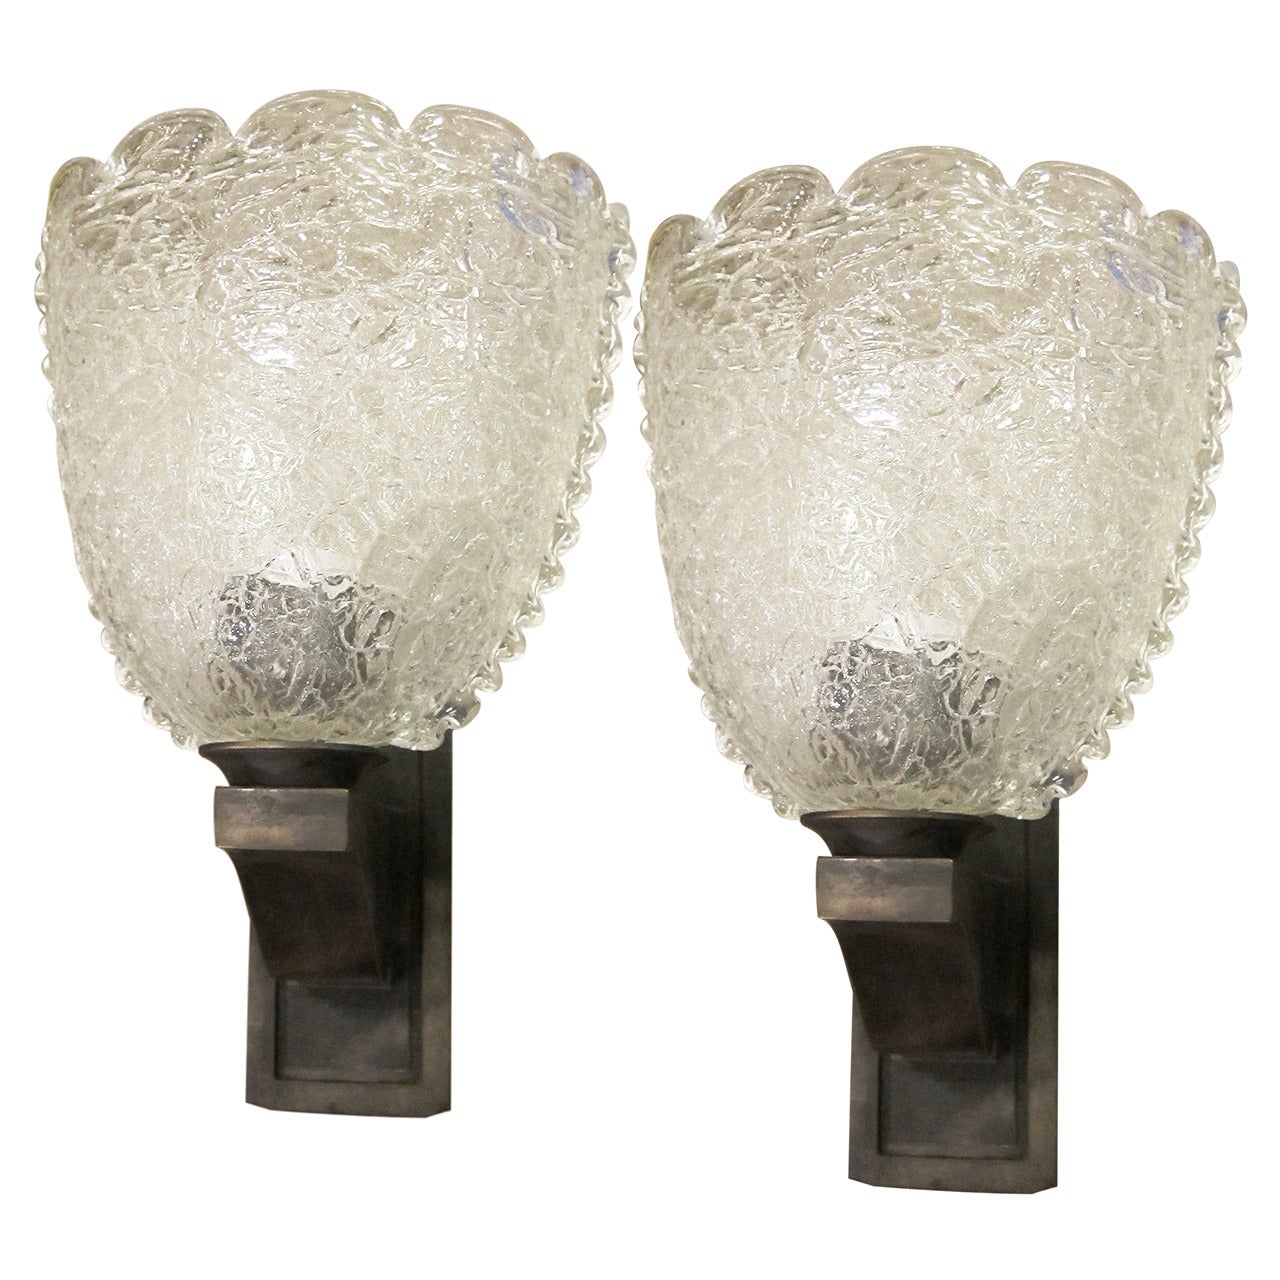 1940s Pair of Murano Handblown Glass Sconces with Waved Pattern from Italy